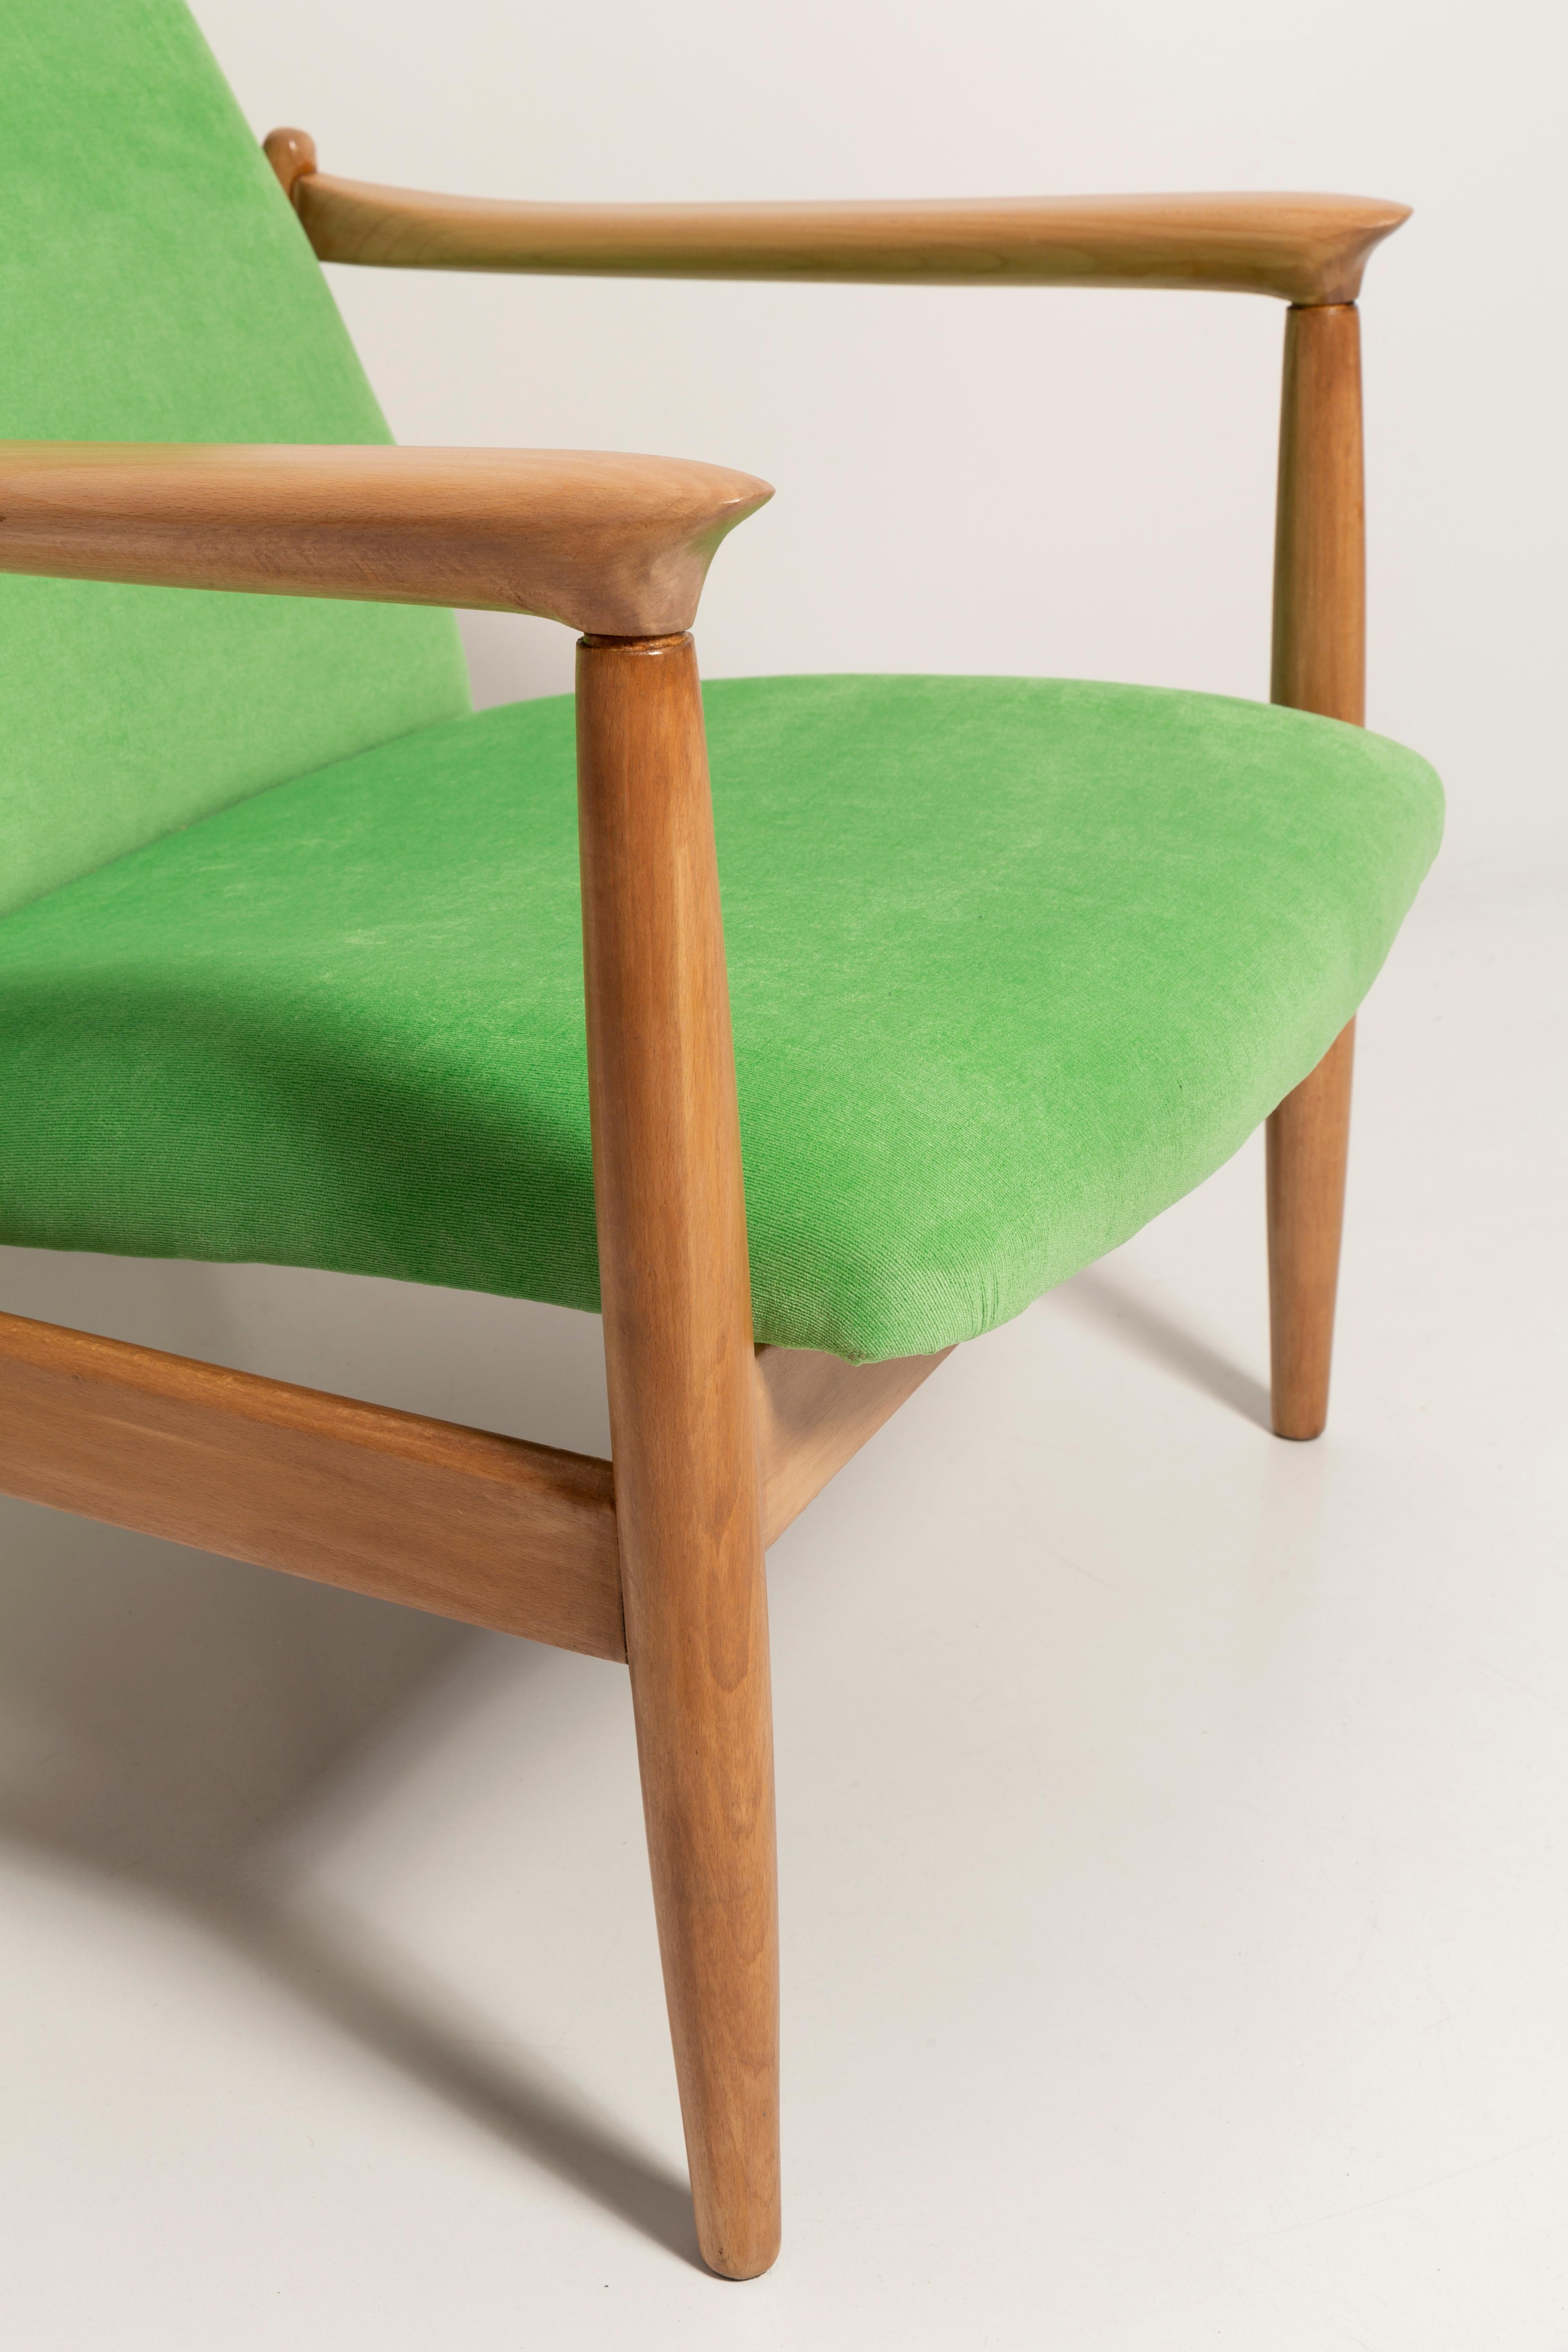 20th Century Set of Two Light Lime Green Velvet Armchairs, GFM-64 High, Edmund Homa, 1960s For Sale